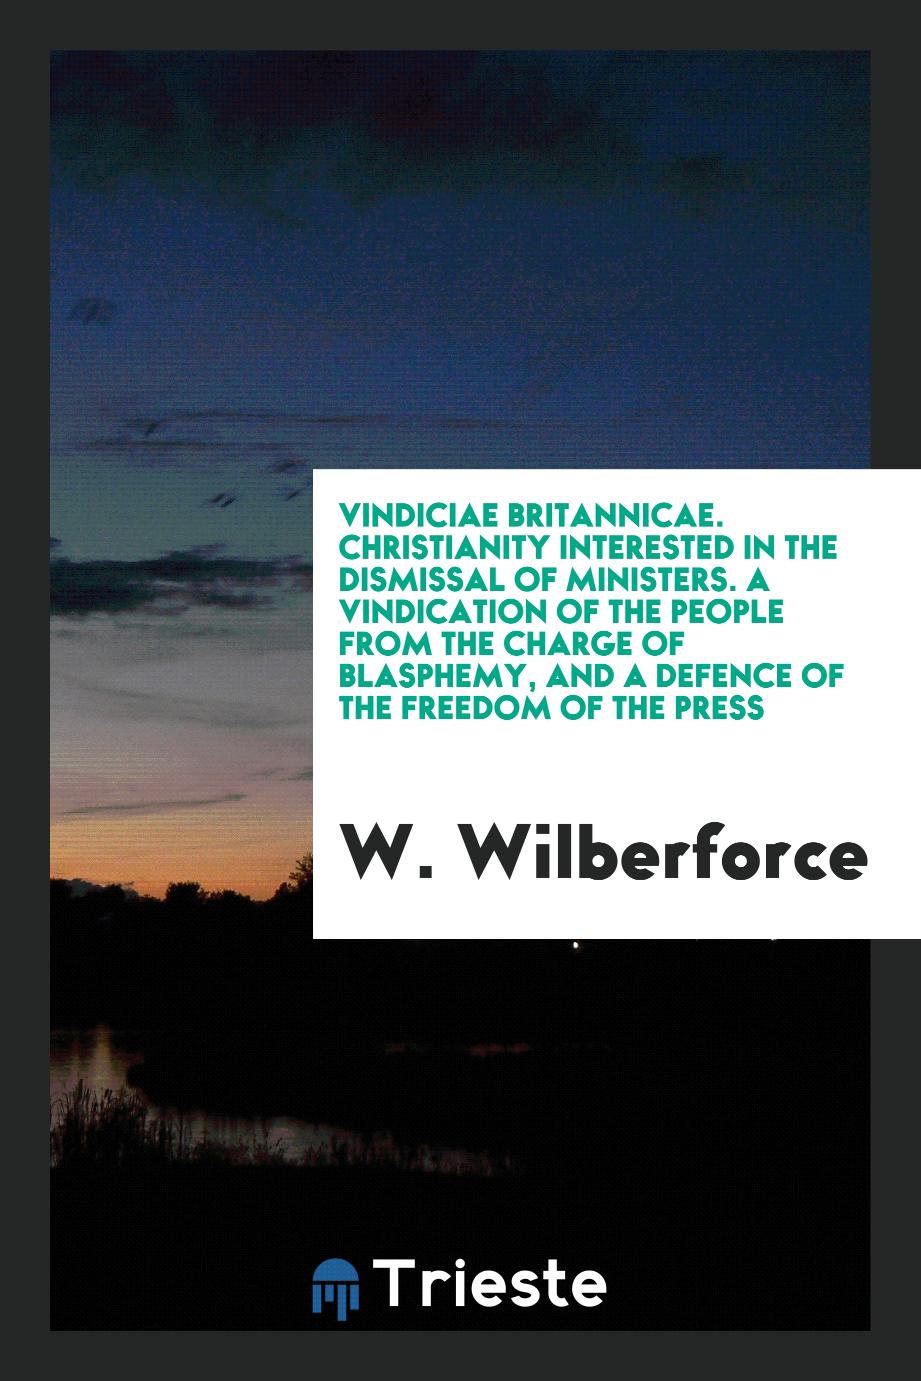 Vindiciae Britannicae. Christianity interested in the dismissal of ministers. A vindication of the people from the charge of blasphemy, and a defence of the freedom of the press